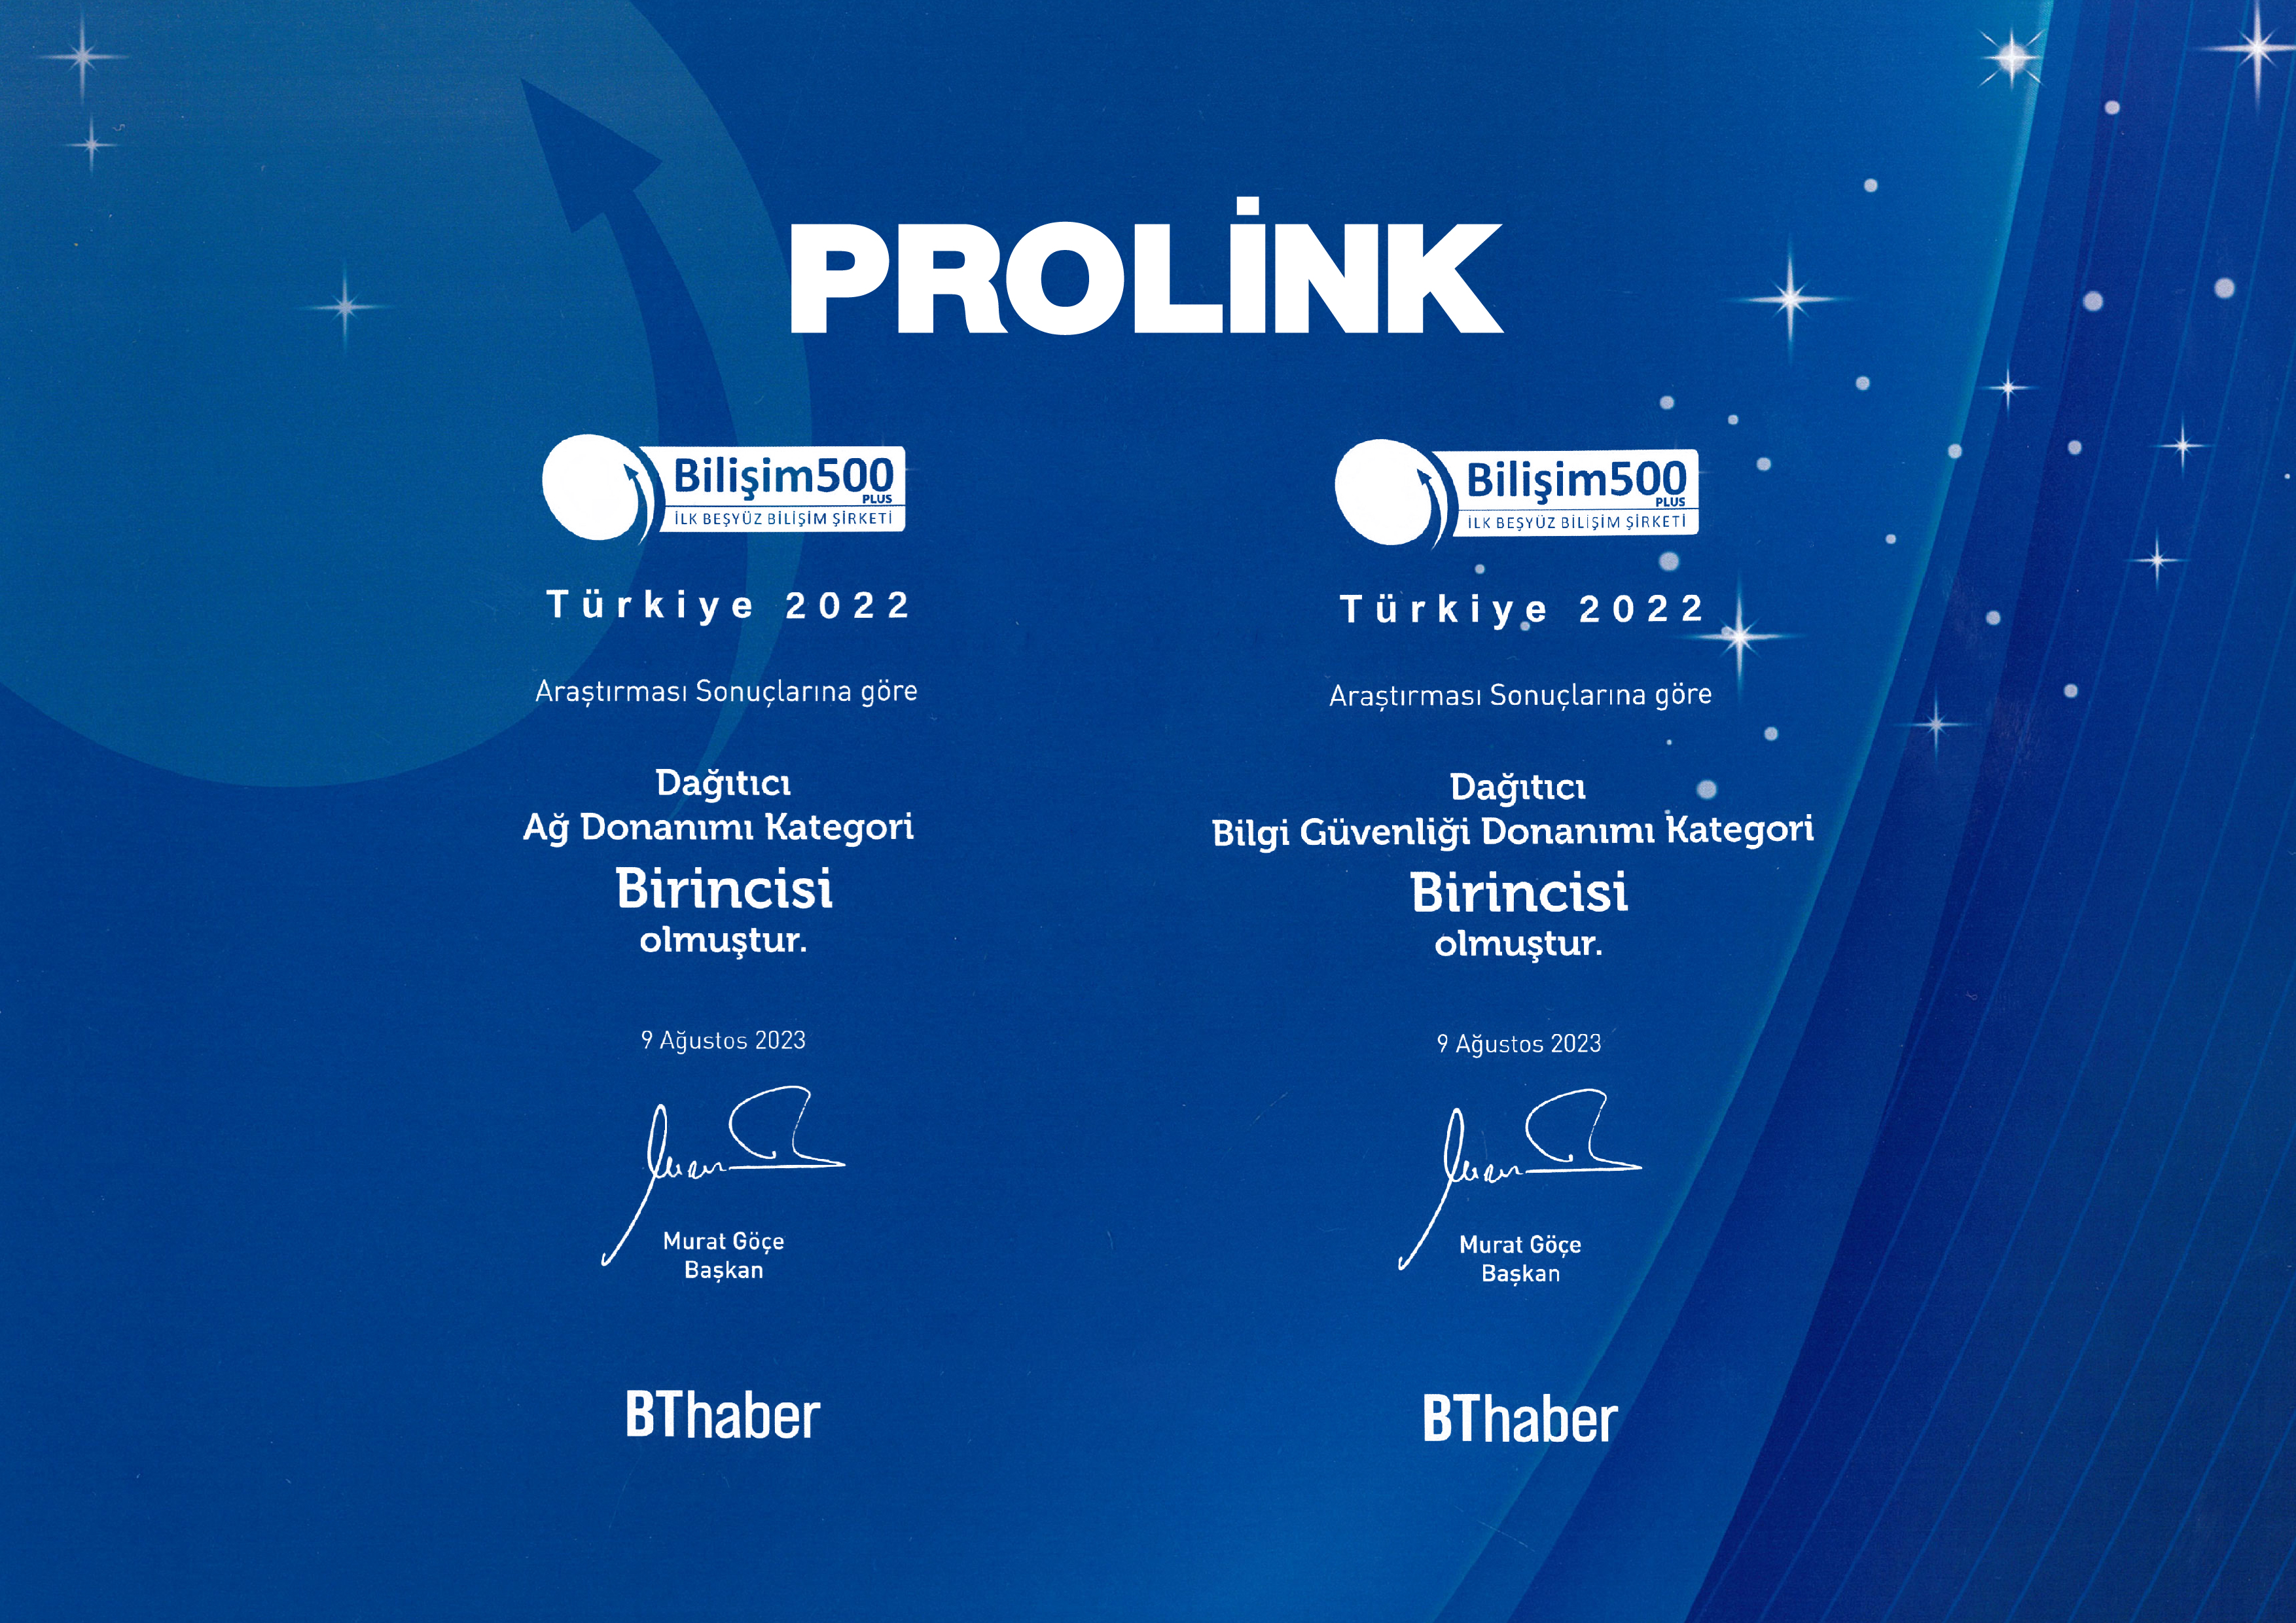 Prolink had the 52nd place among the Top 500 ICT Companies in Turkey 